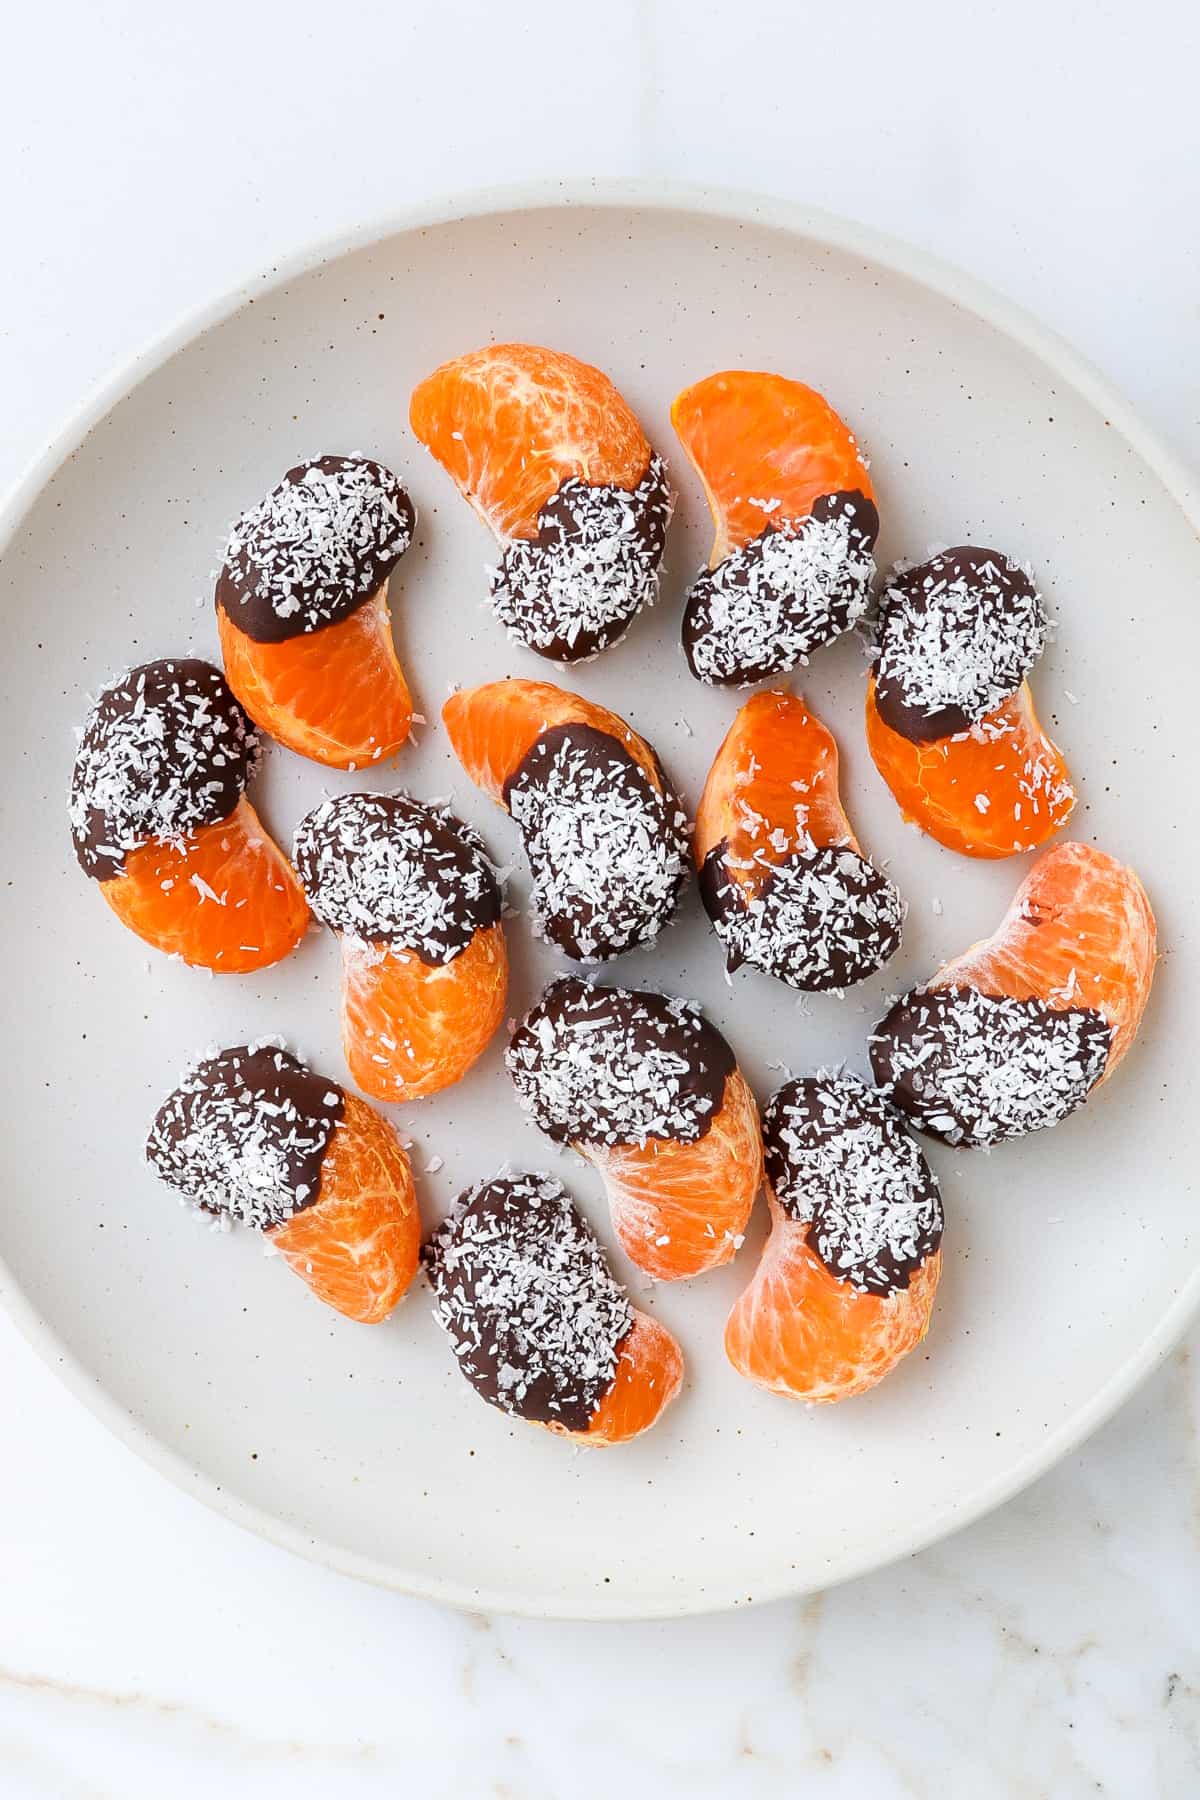 Chocolate covered orange pieces sprinkled with coconut.